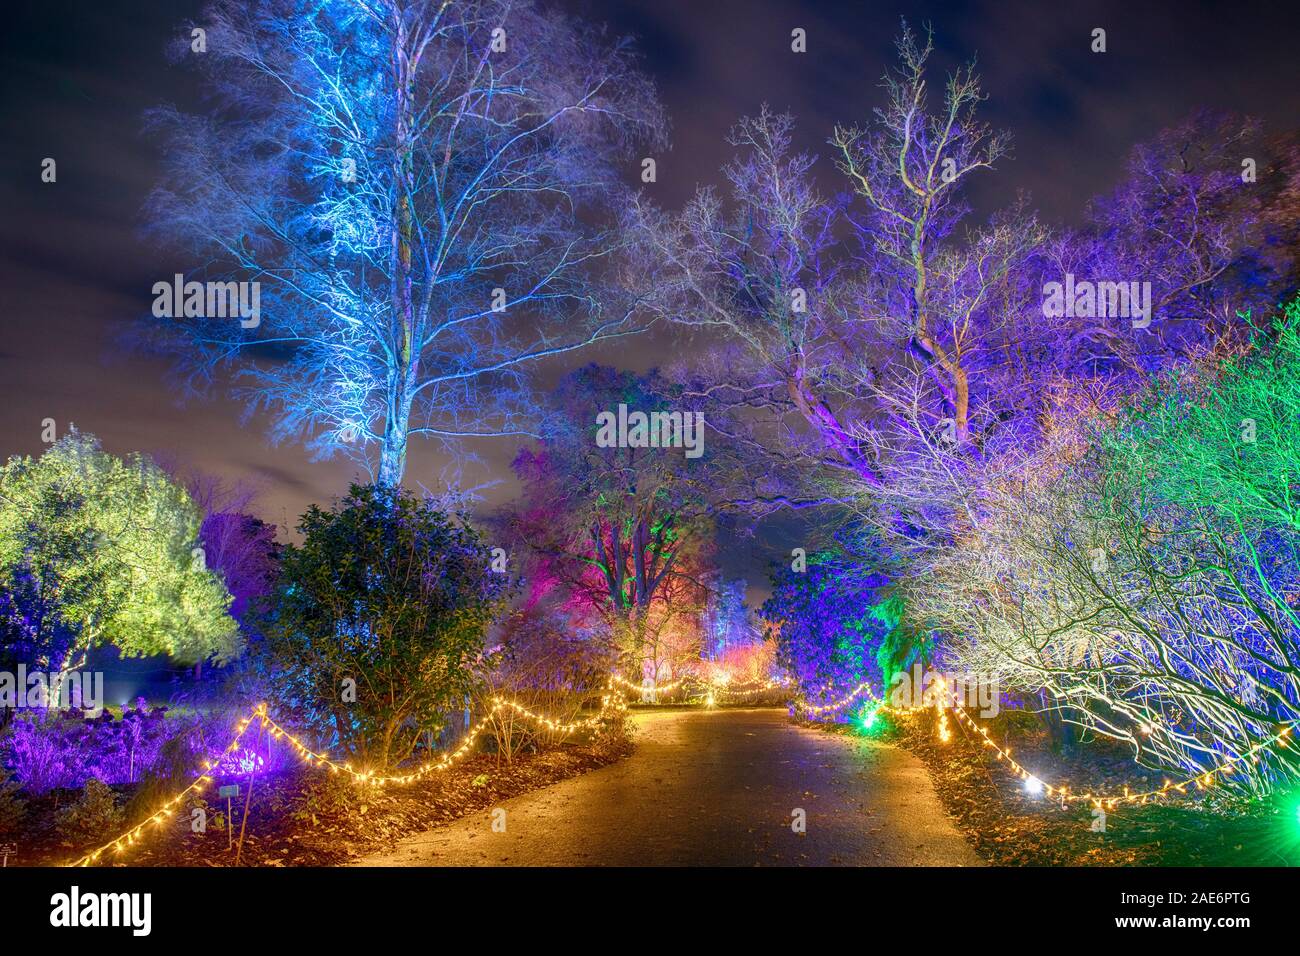 Rhs Wisley Surrey Uk Rhs Gardens Winter Glow 2019 6th December 2019 Enchanting Trail With Dazzling Light Installations Themed Around The Four Seasons All Lit Up At Night During The Festive Season